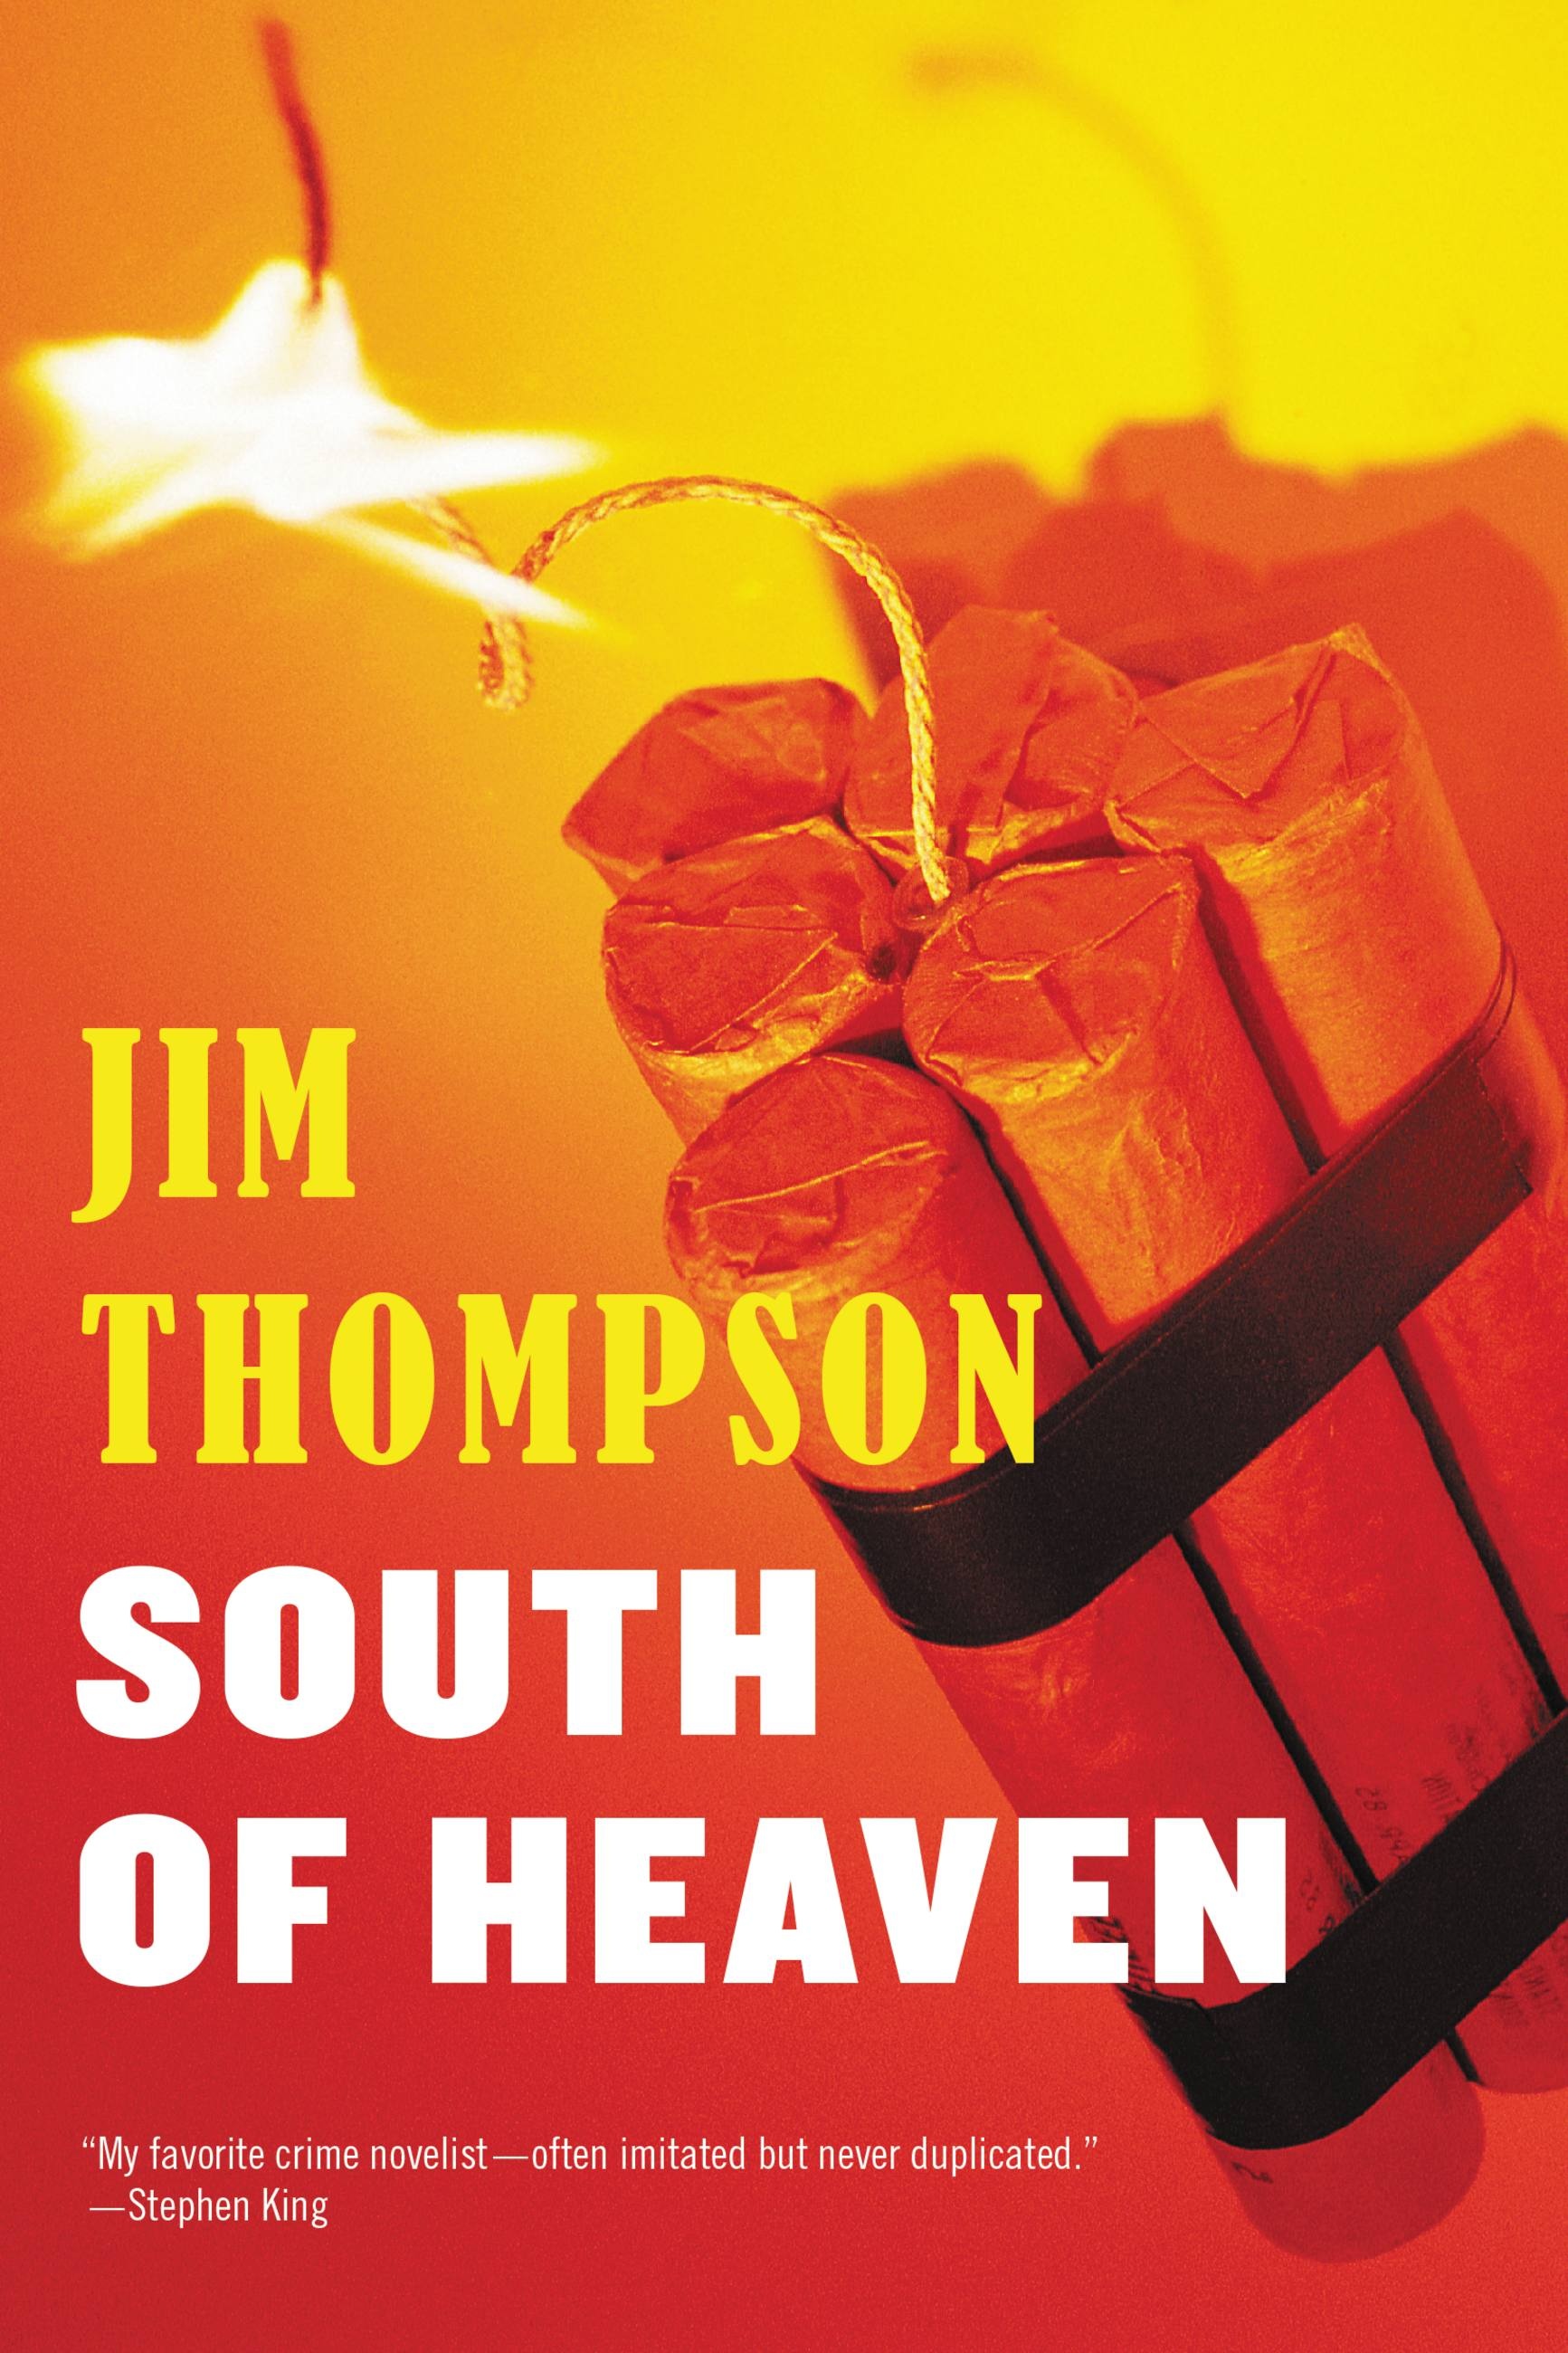 South Of Heaven by Jim Thompson Hachette Book Group photo image pic